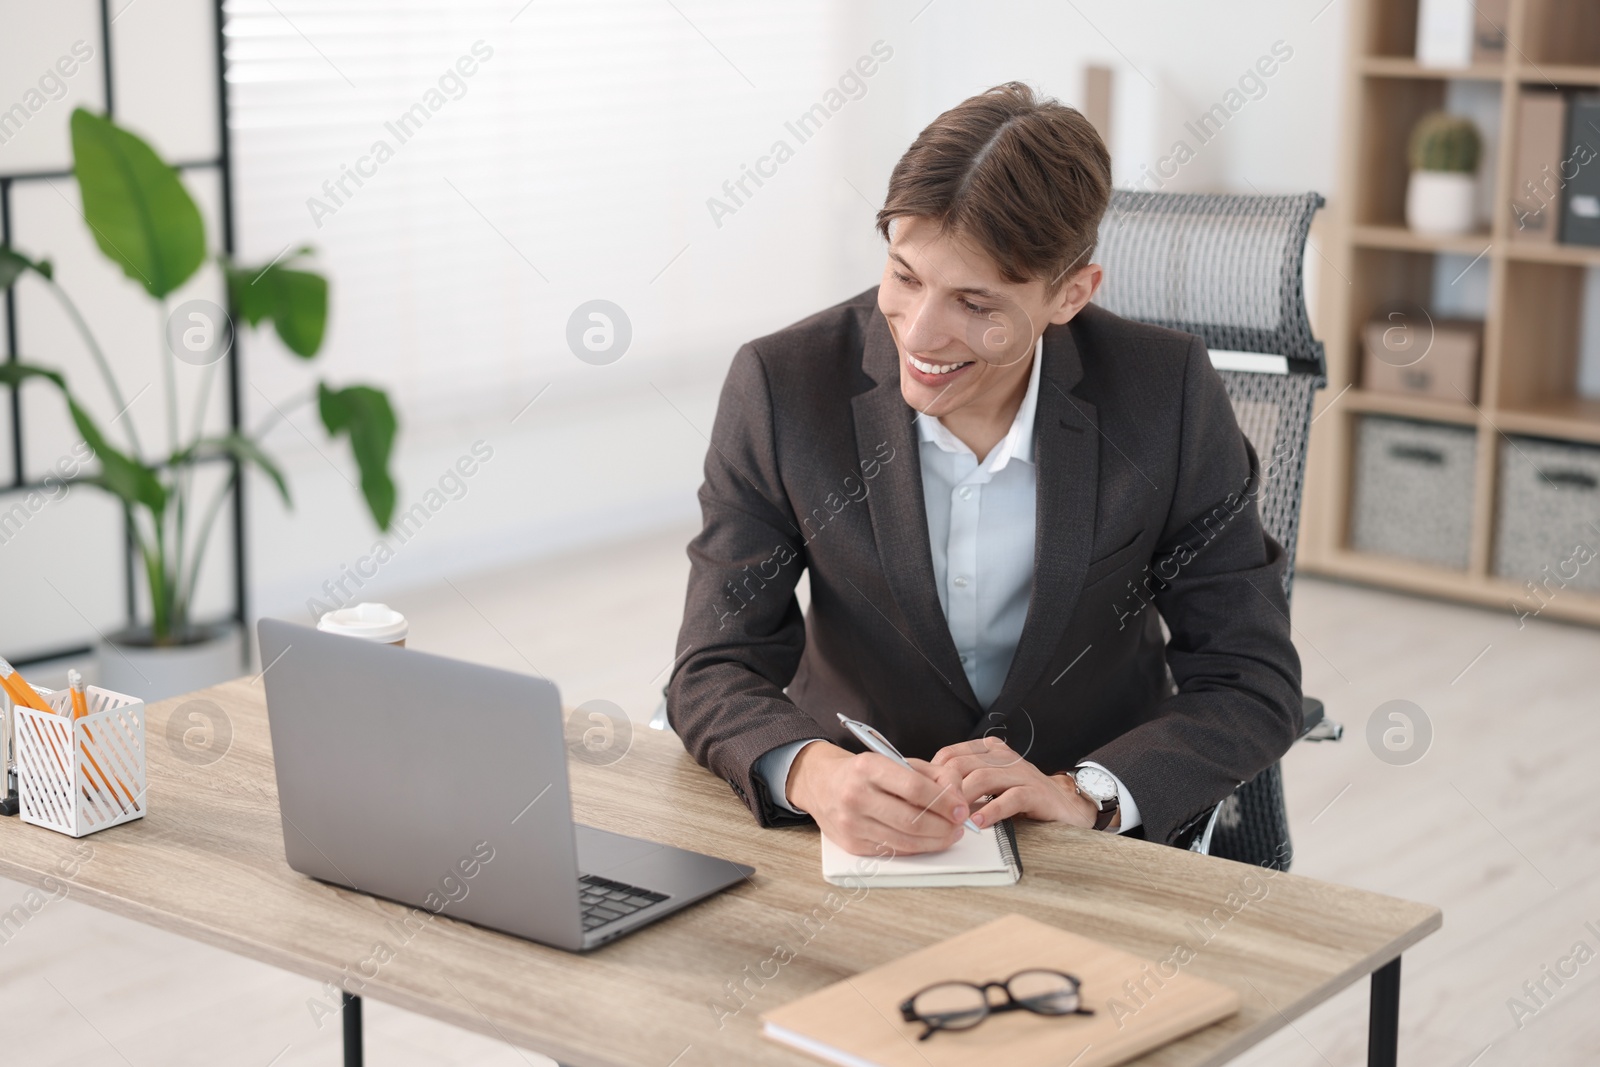 Photo of Man taking notes during webinar at wooden table indoors